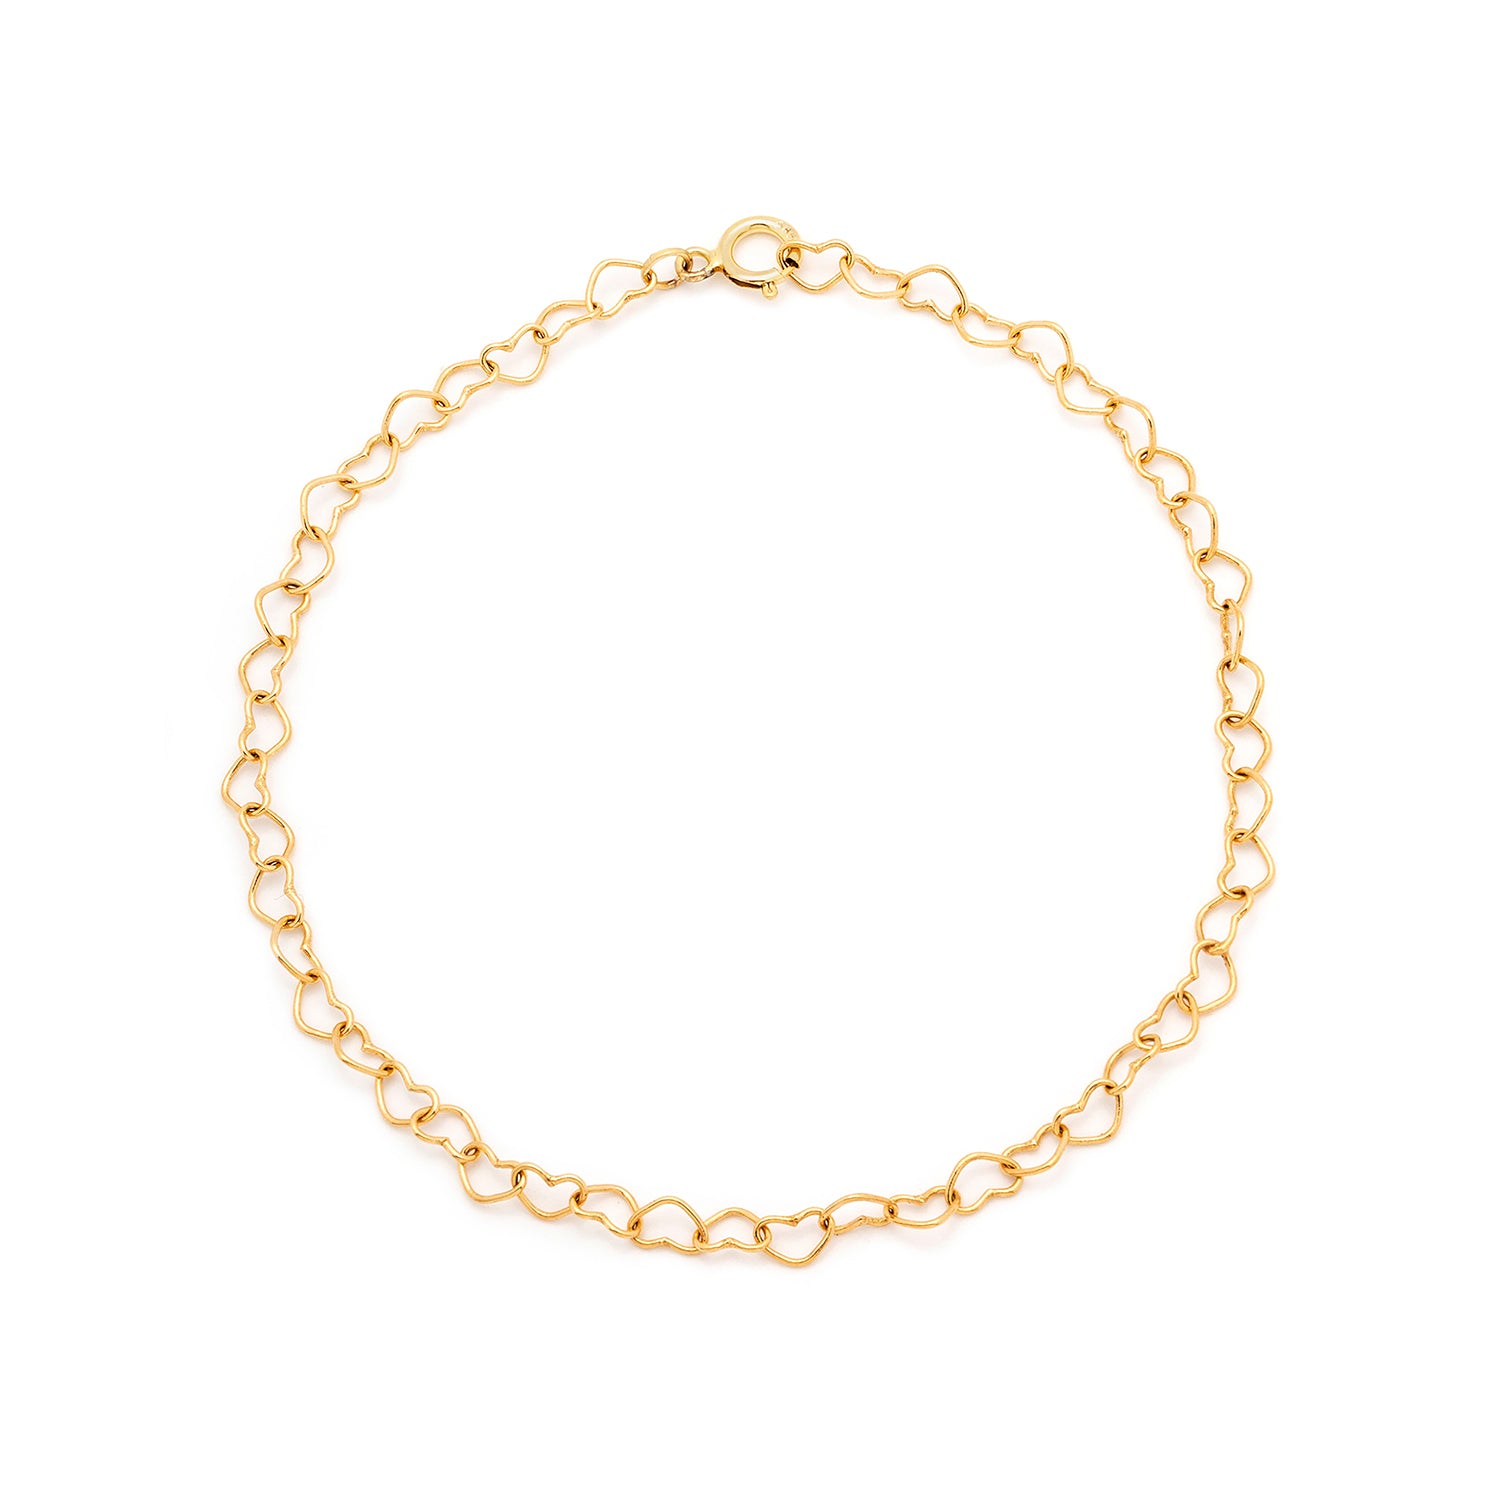 Ann-Louise Jewellers Puff Heart Bracelet in 10K Yellow, White and Rose Gold  | Hillside Shopping Centre